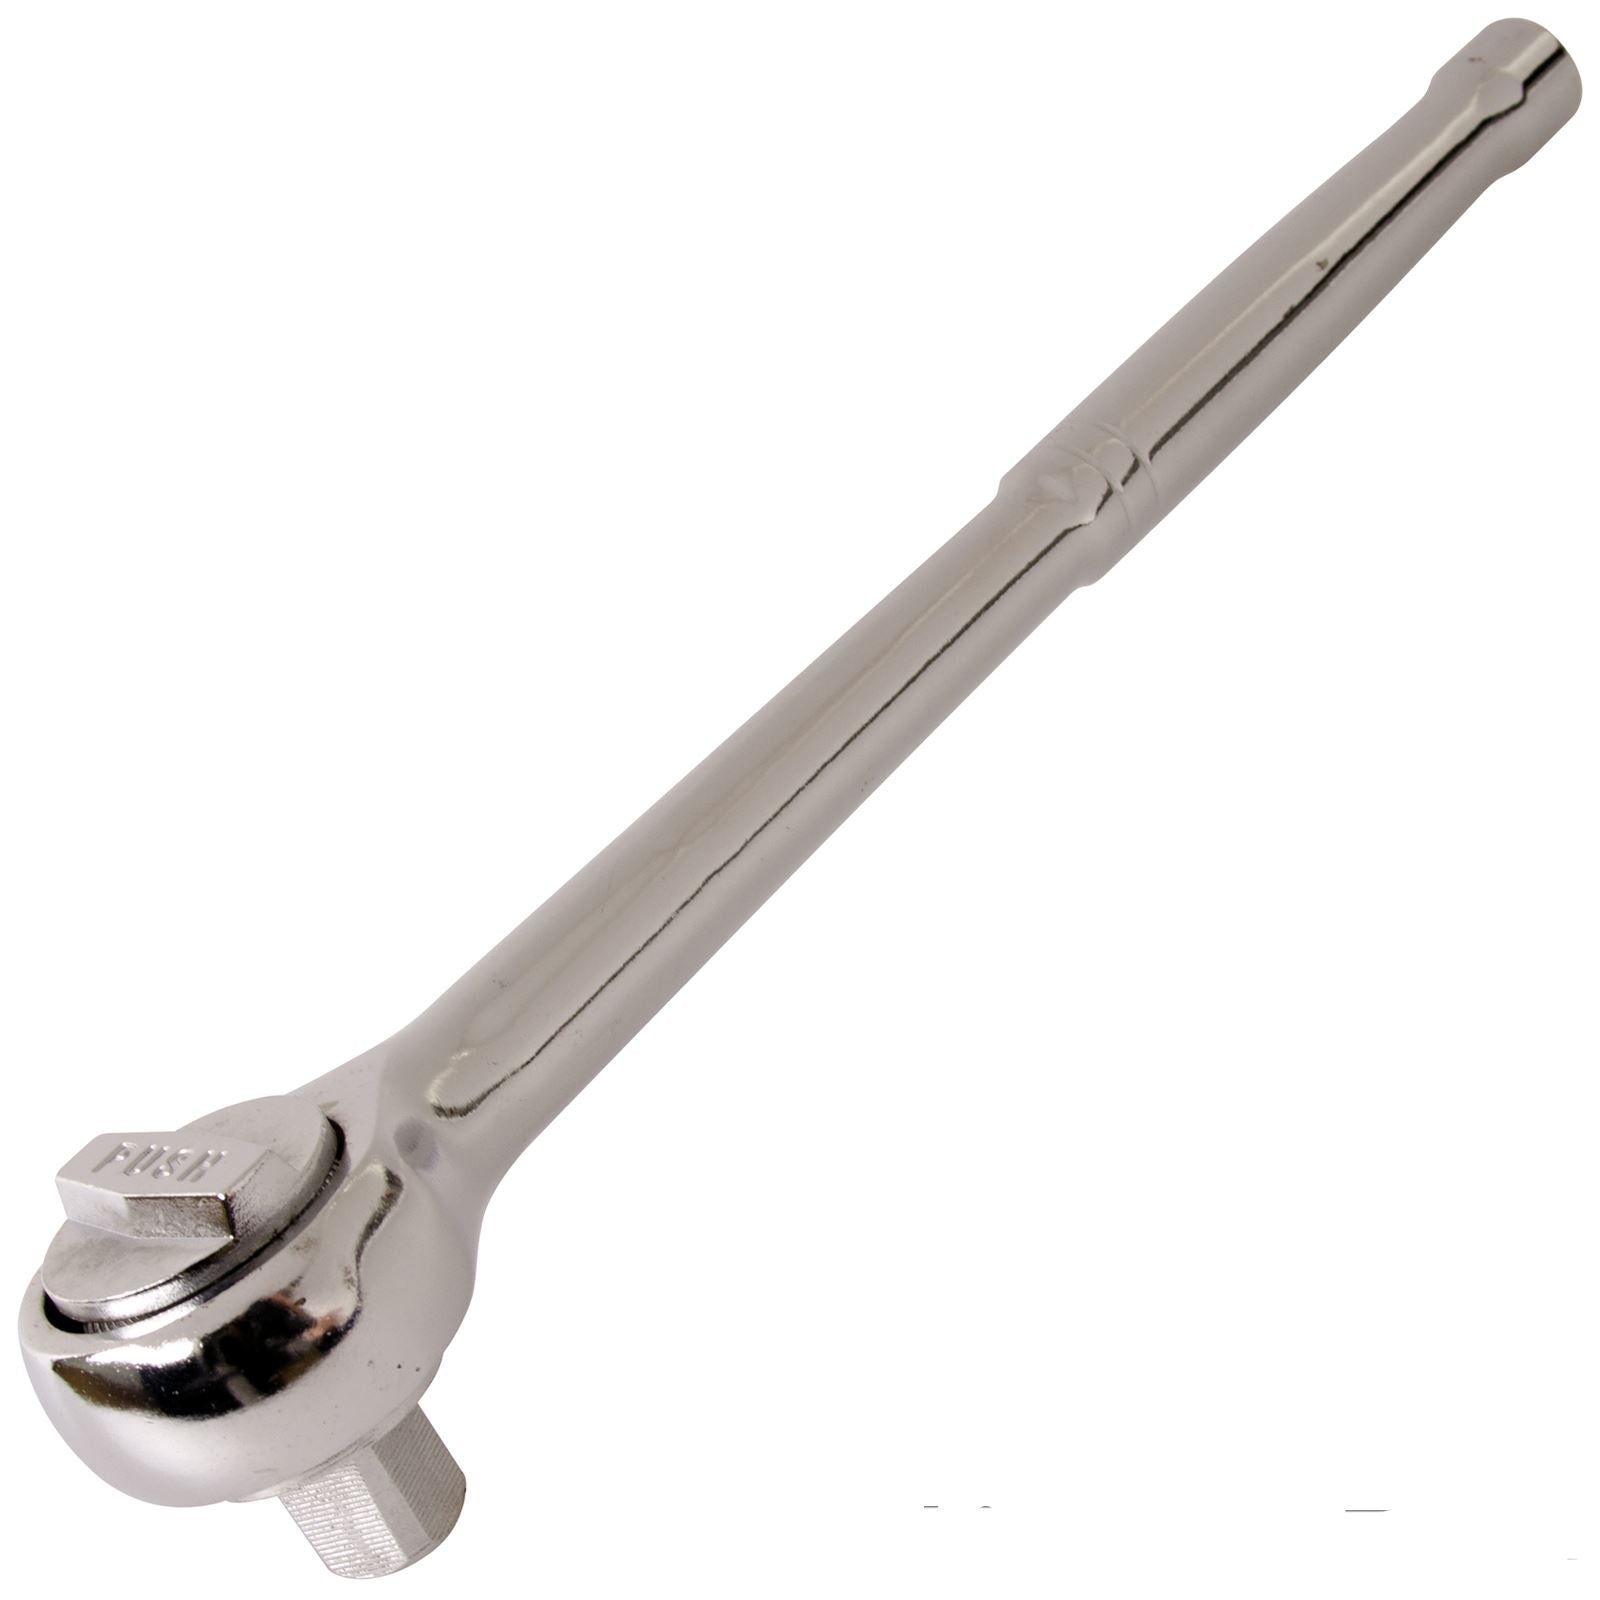 Silverline Reversible Ratchet Handle 1/4", 3/8" and 1/2" Drive